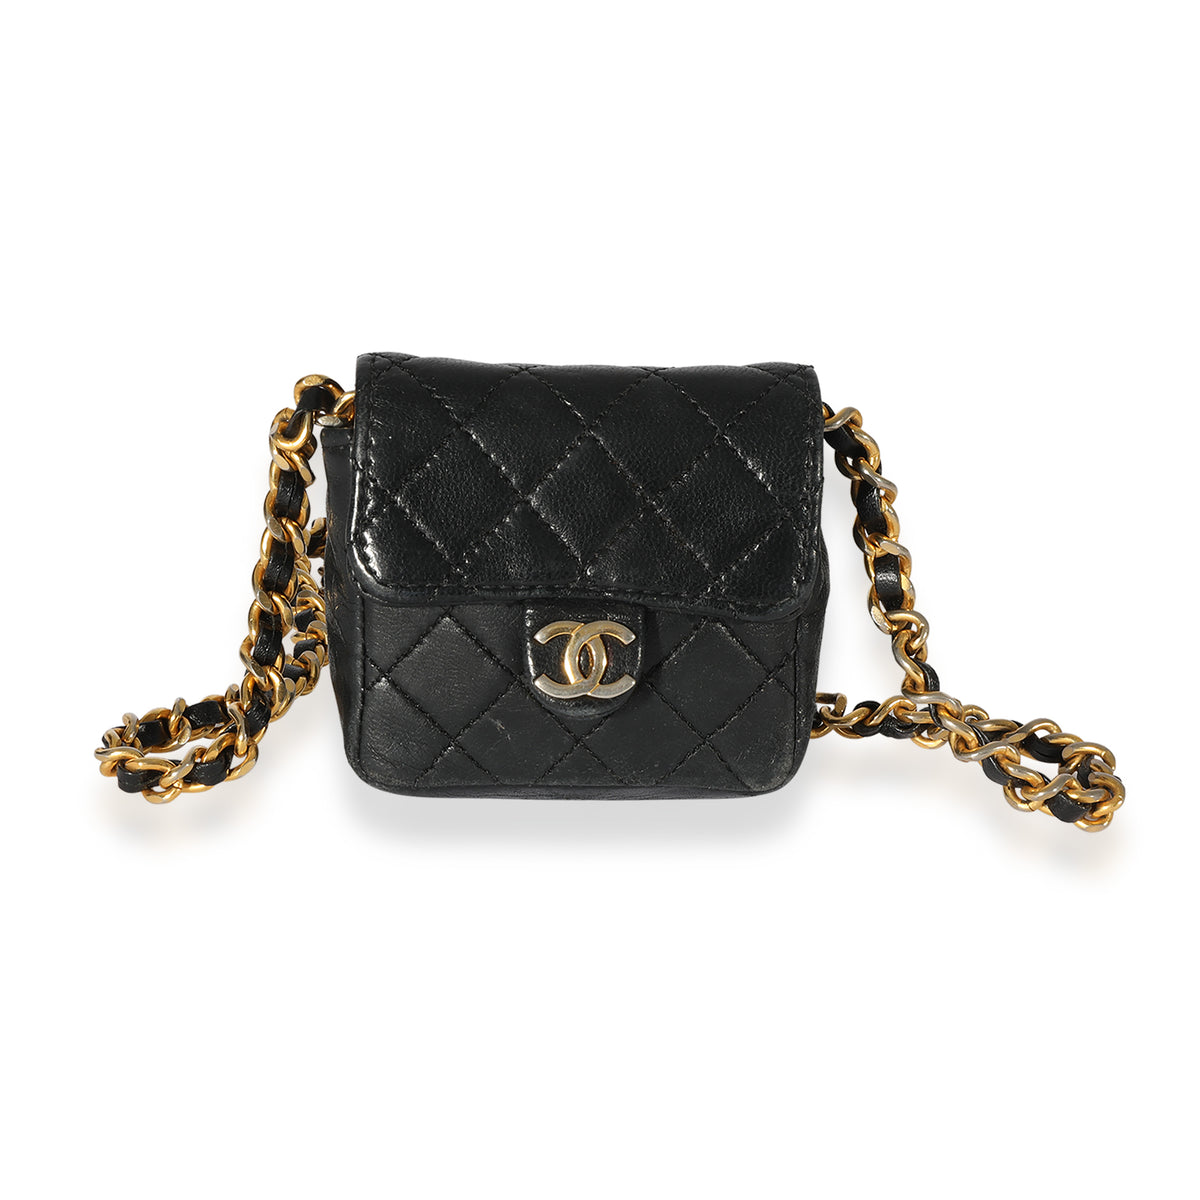 Chanel Vintage Black Quilted Lambskin Micro Flap Bag